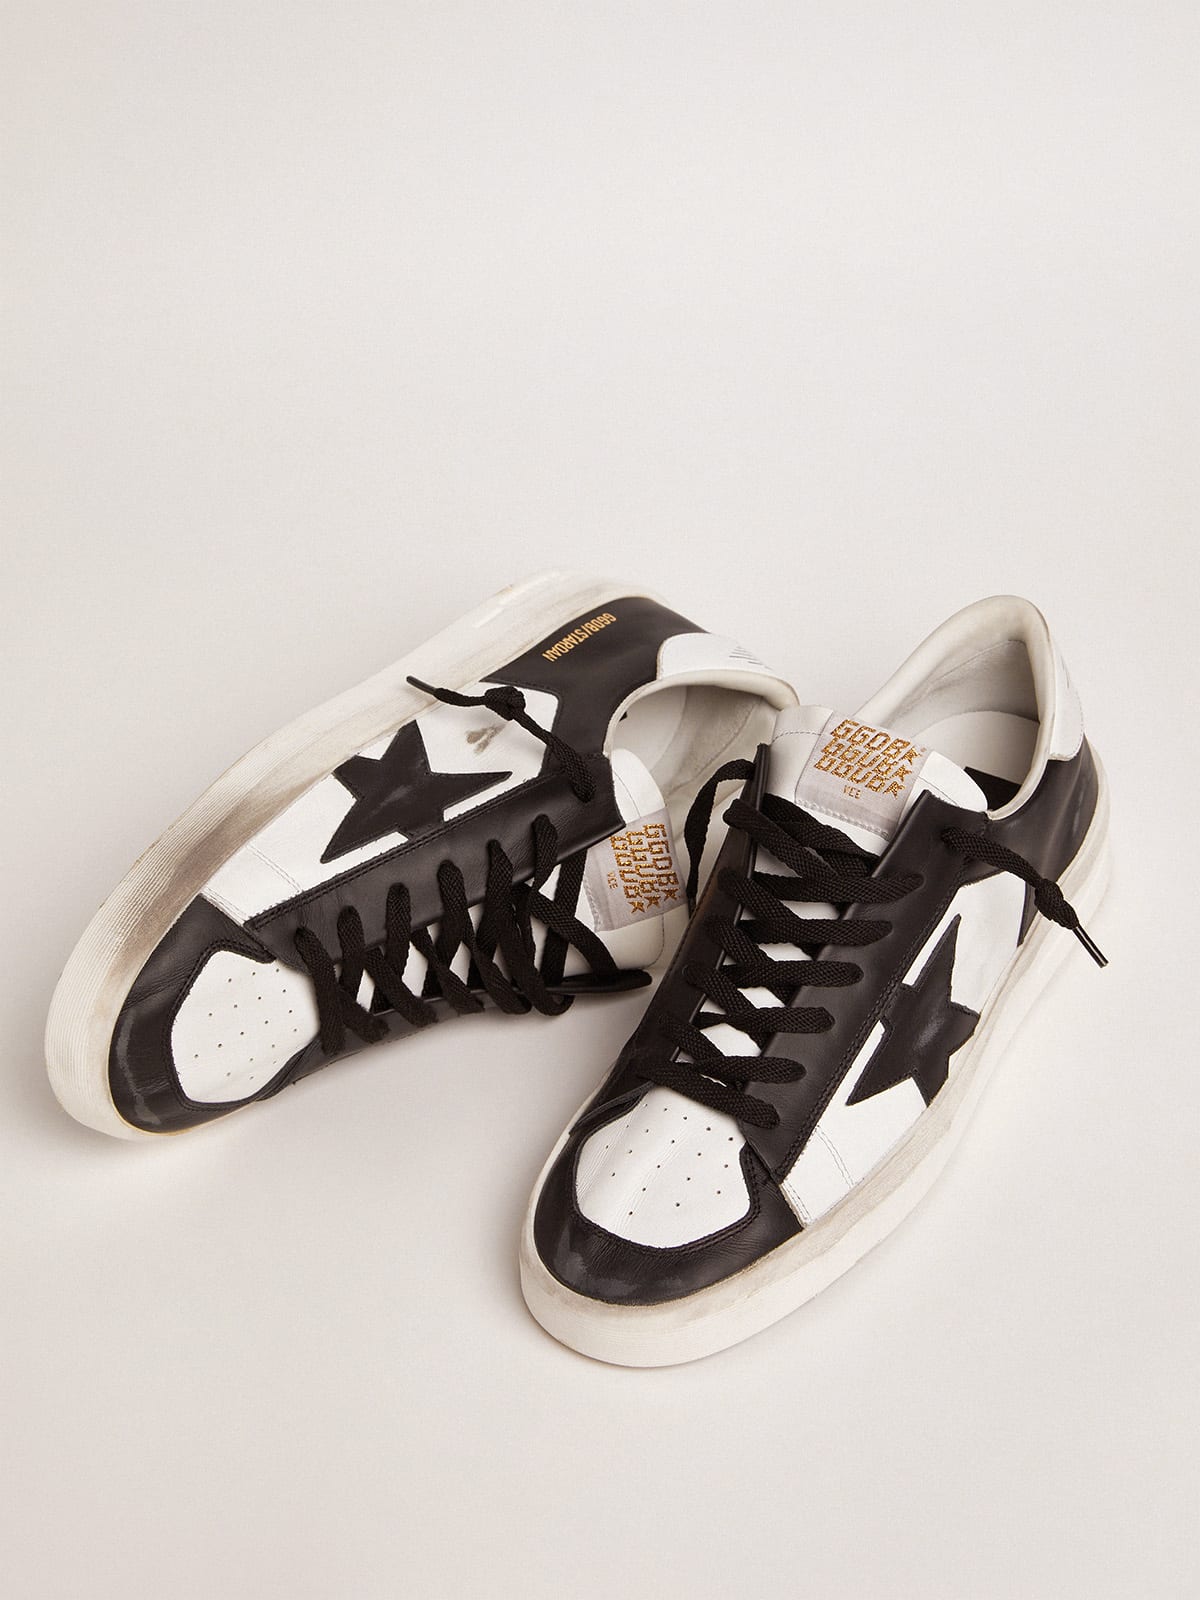 Golden Goose - Men’s Stardan sneakers in black and white leather in 